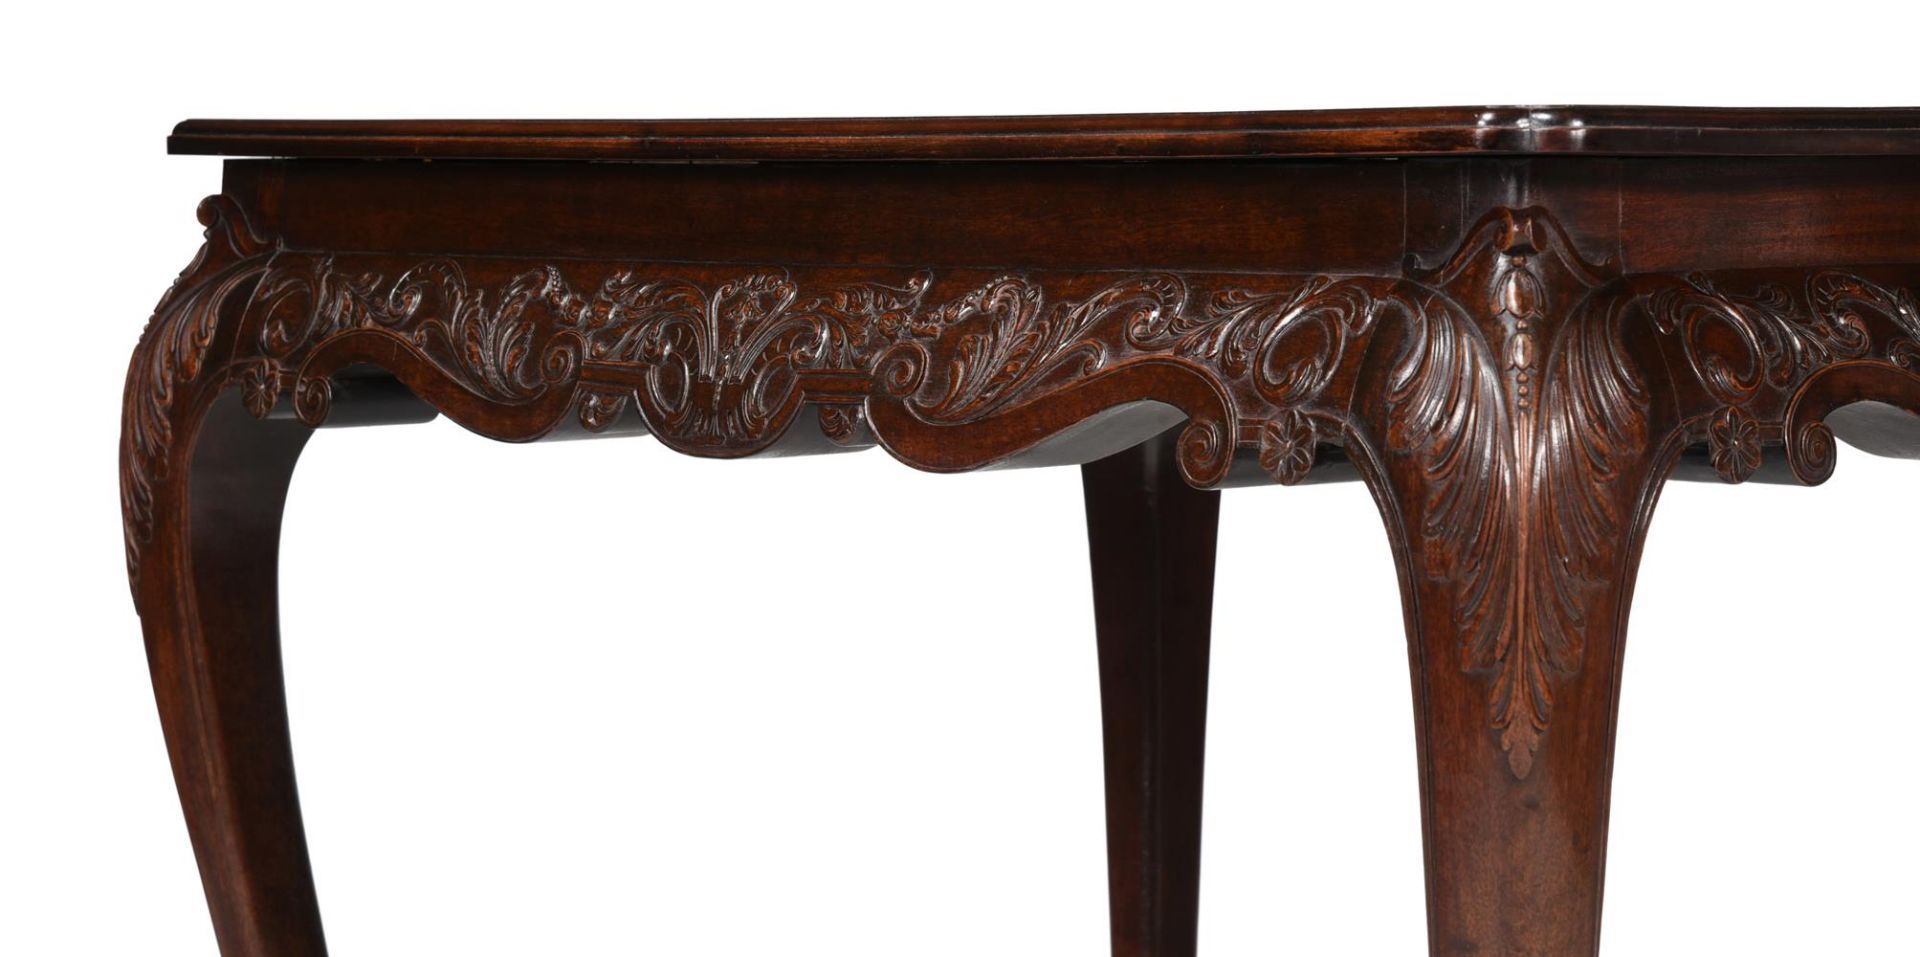 A CARVED MAHOGANY CENTRE OR SILVER TABLE, IN GEORGE II STYLE, 19TH CENTURY - Image 4 of 6